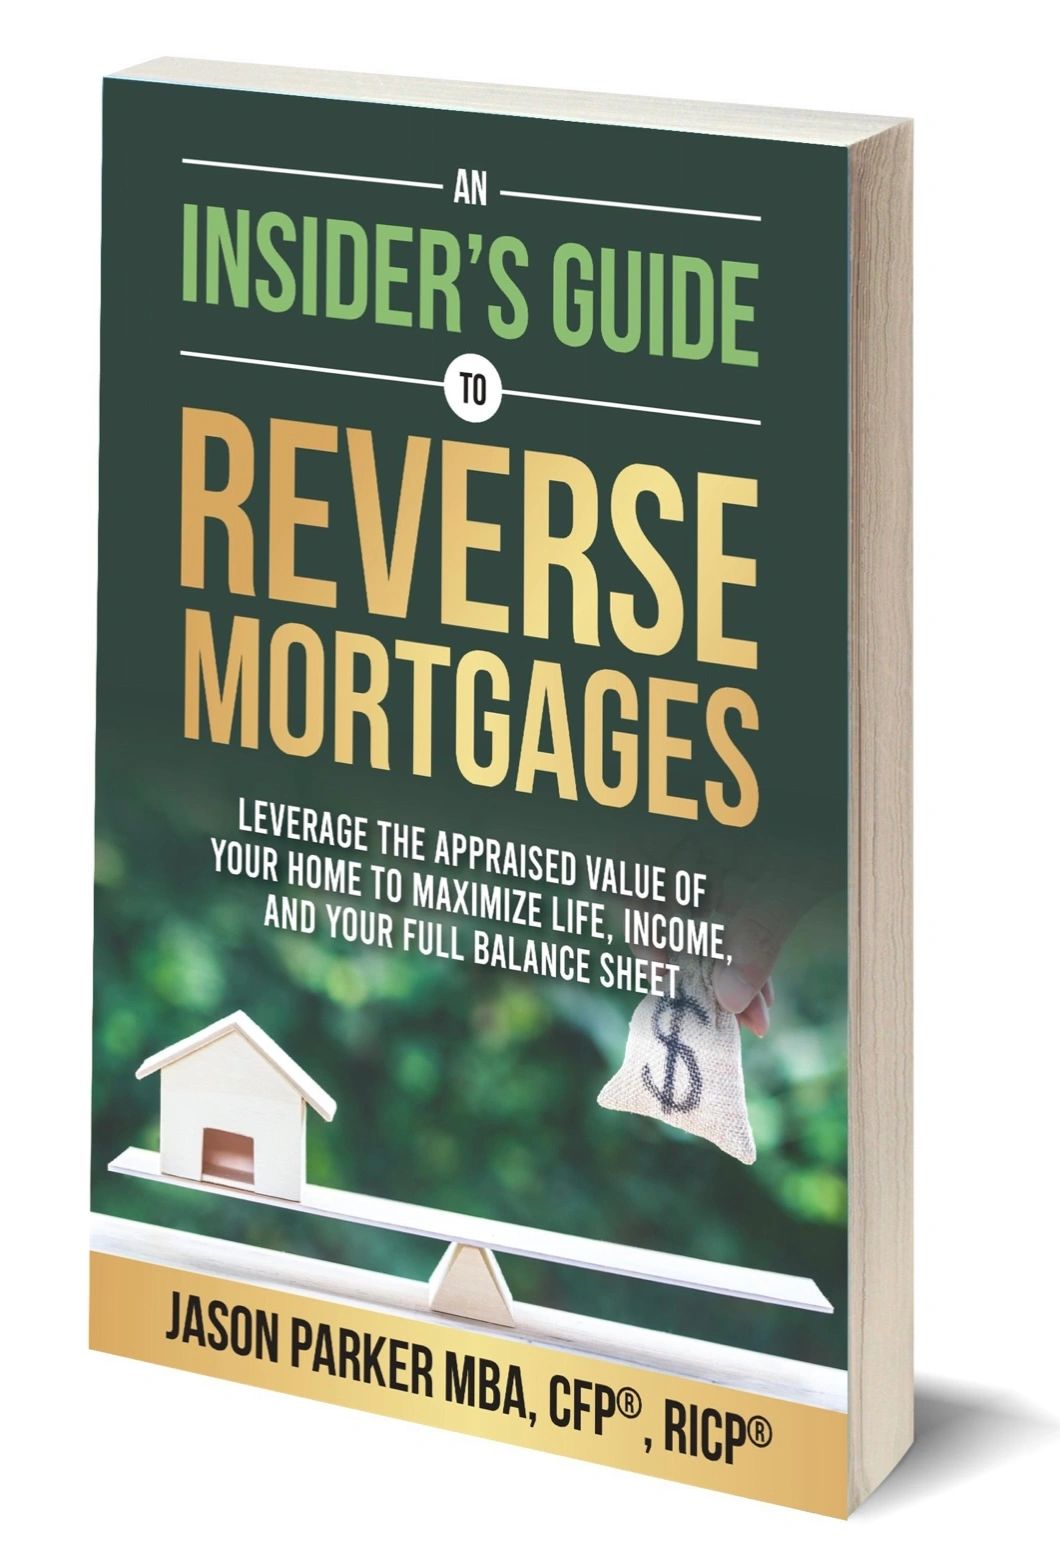 Easy-to read Reverse Mortgage education book for homeowners, families, and professionals.